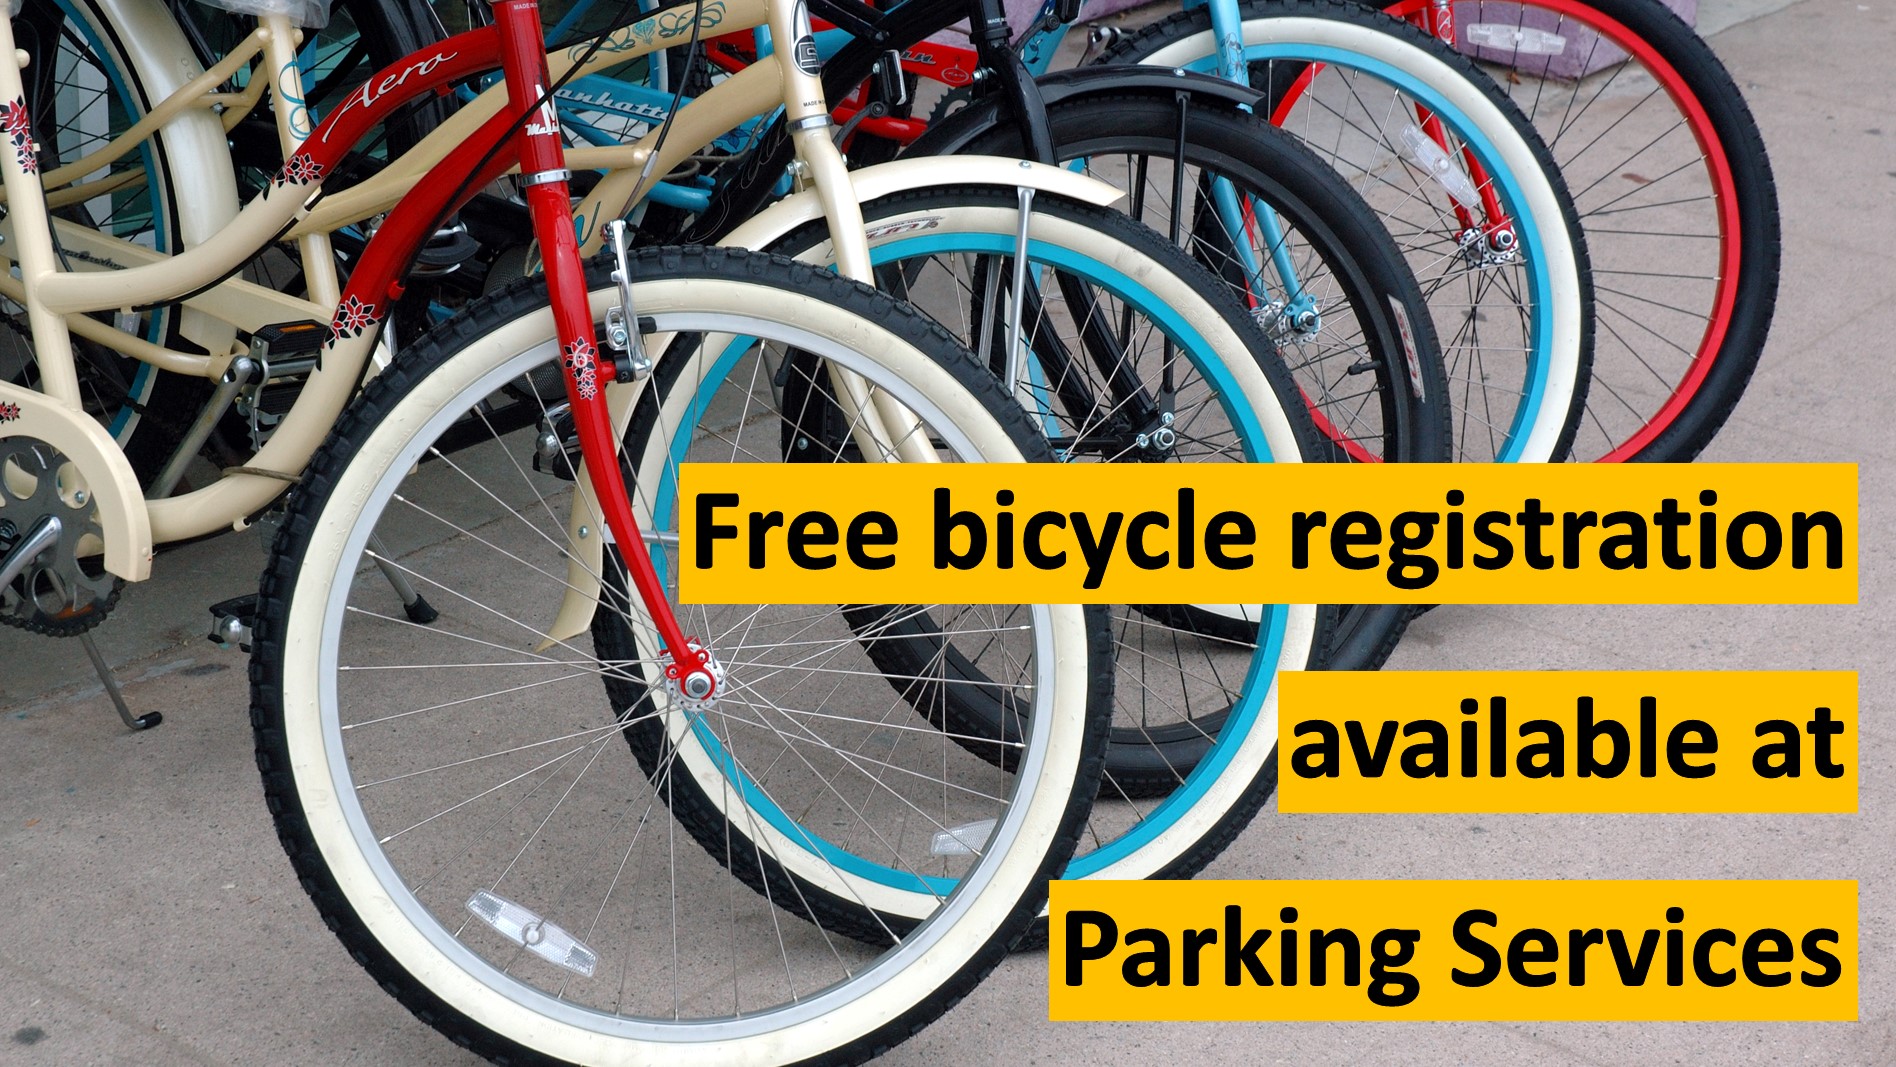 free bicycle registration at Parking Services